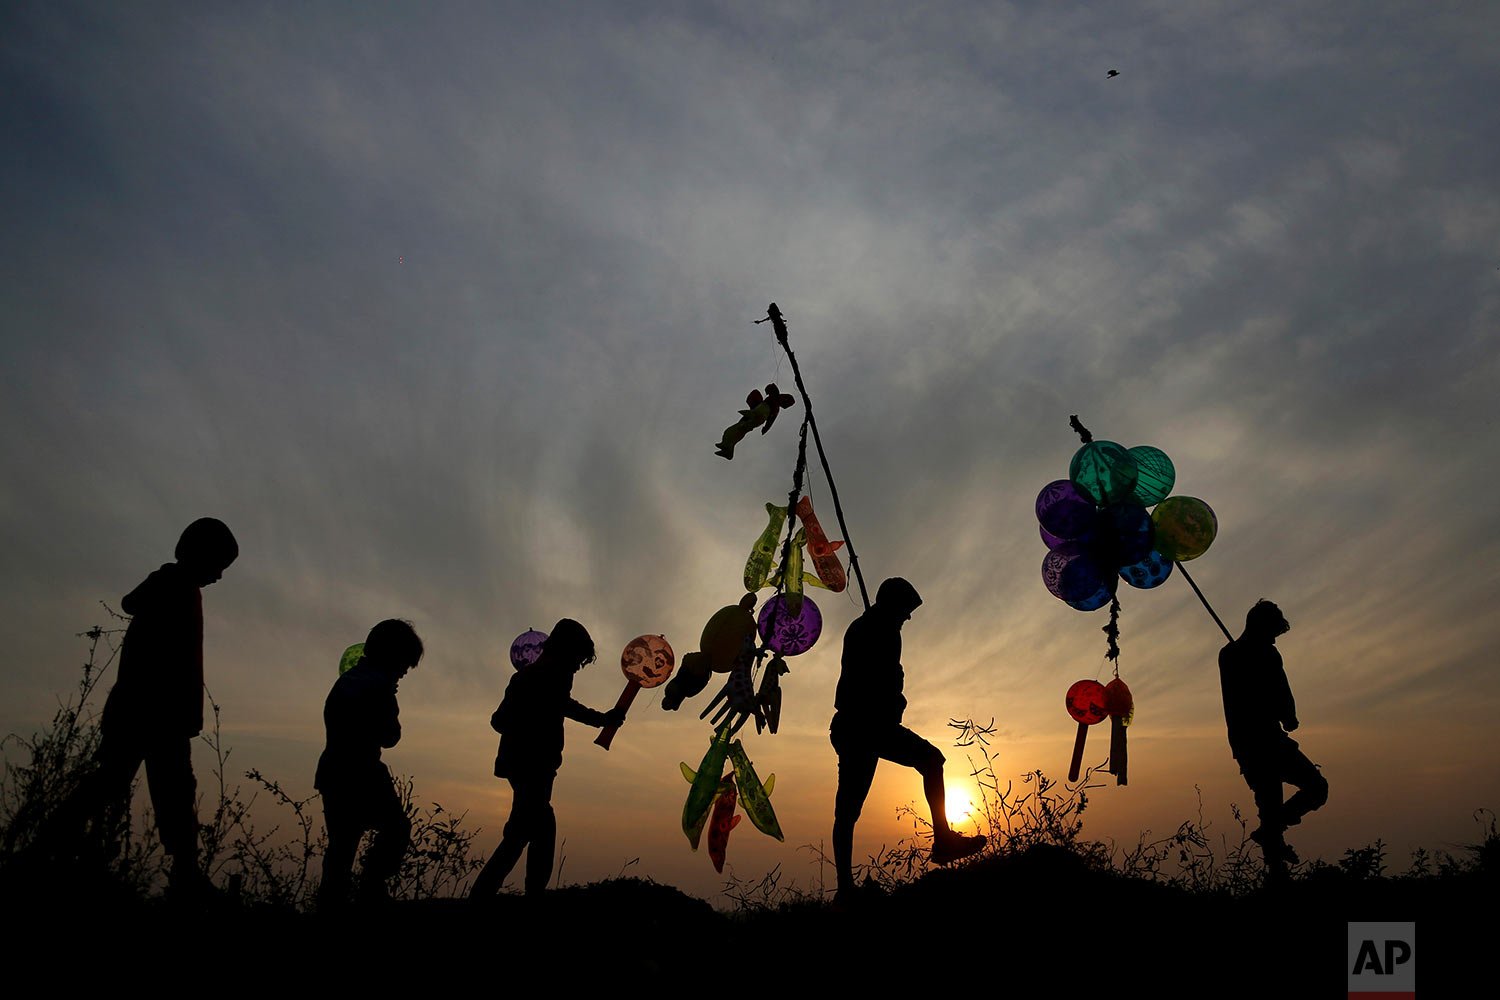  Indian balloon vendors walk back home as the sun sets on New Year's Eve in Jammu, India, Friday, Dec. 31, 2021. (AP Photo/Channi Anand) 